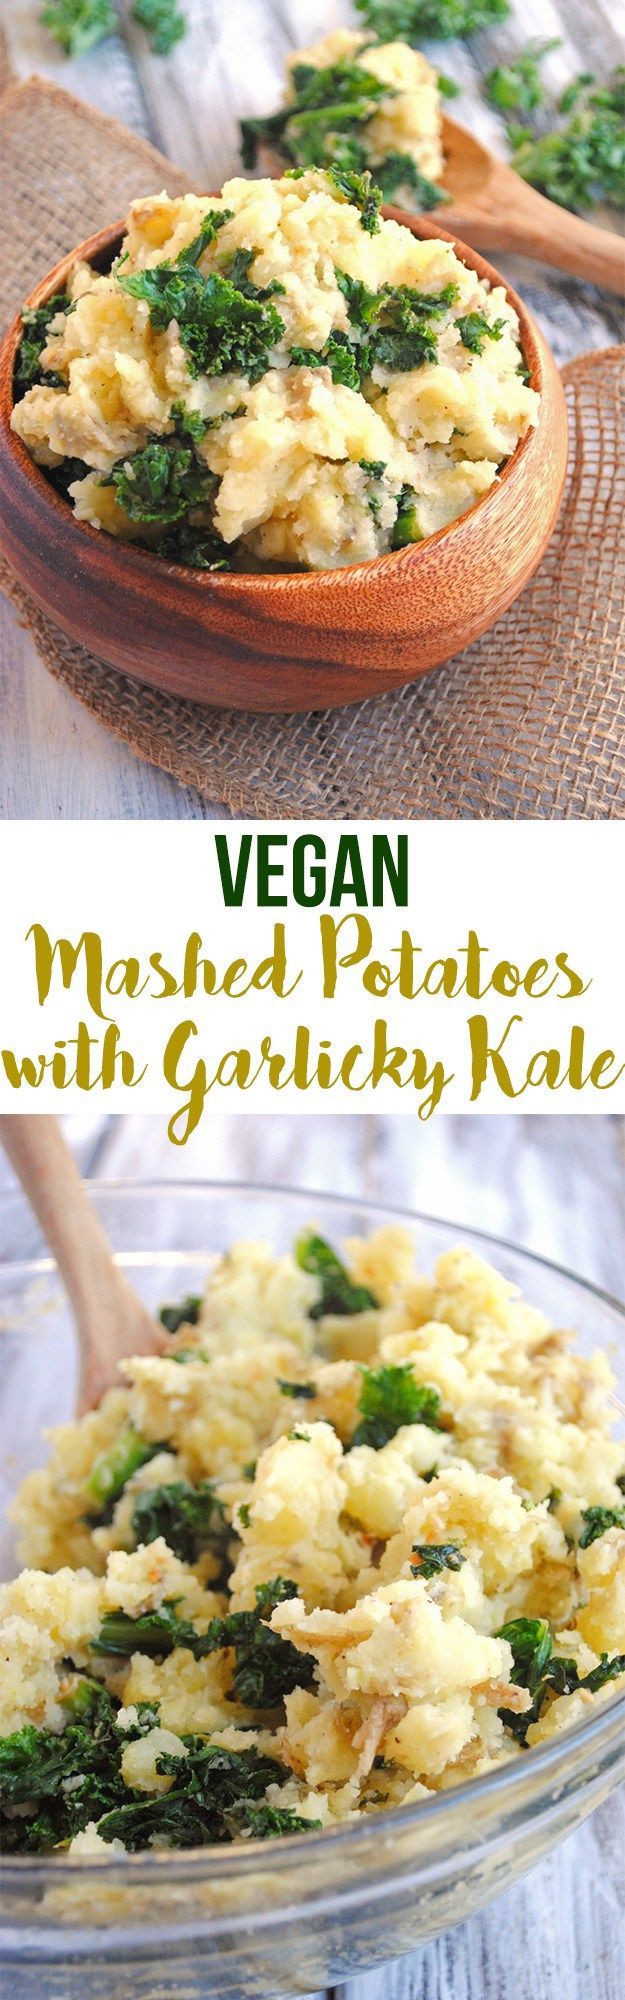 Make these creamy, delicious Vegan Mashed Potatoes for your next dinner party! Gar